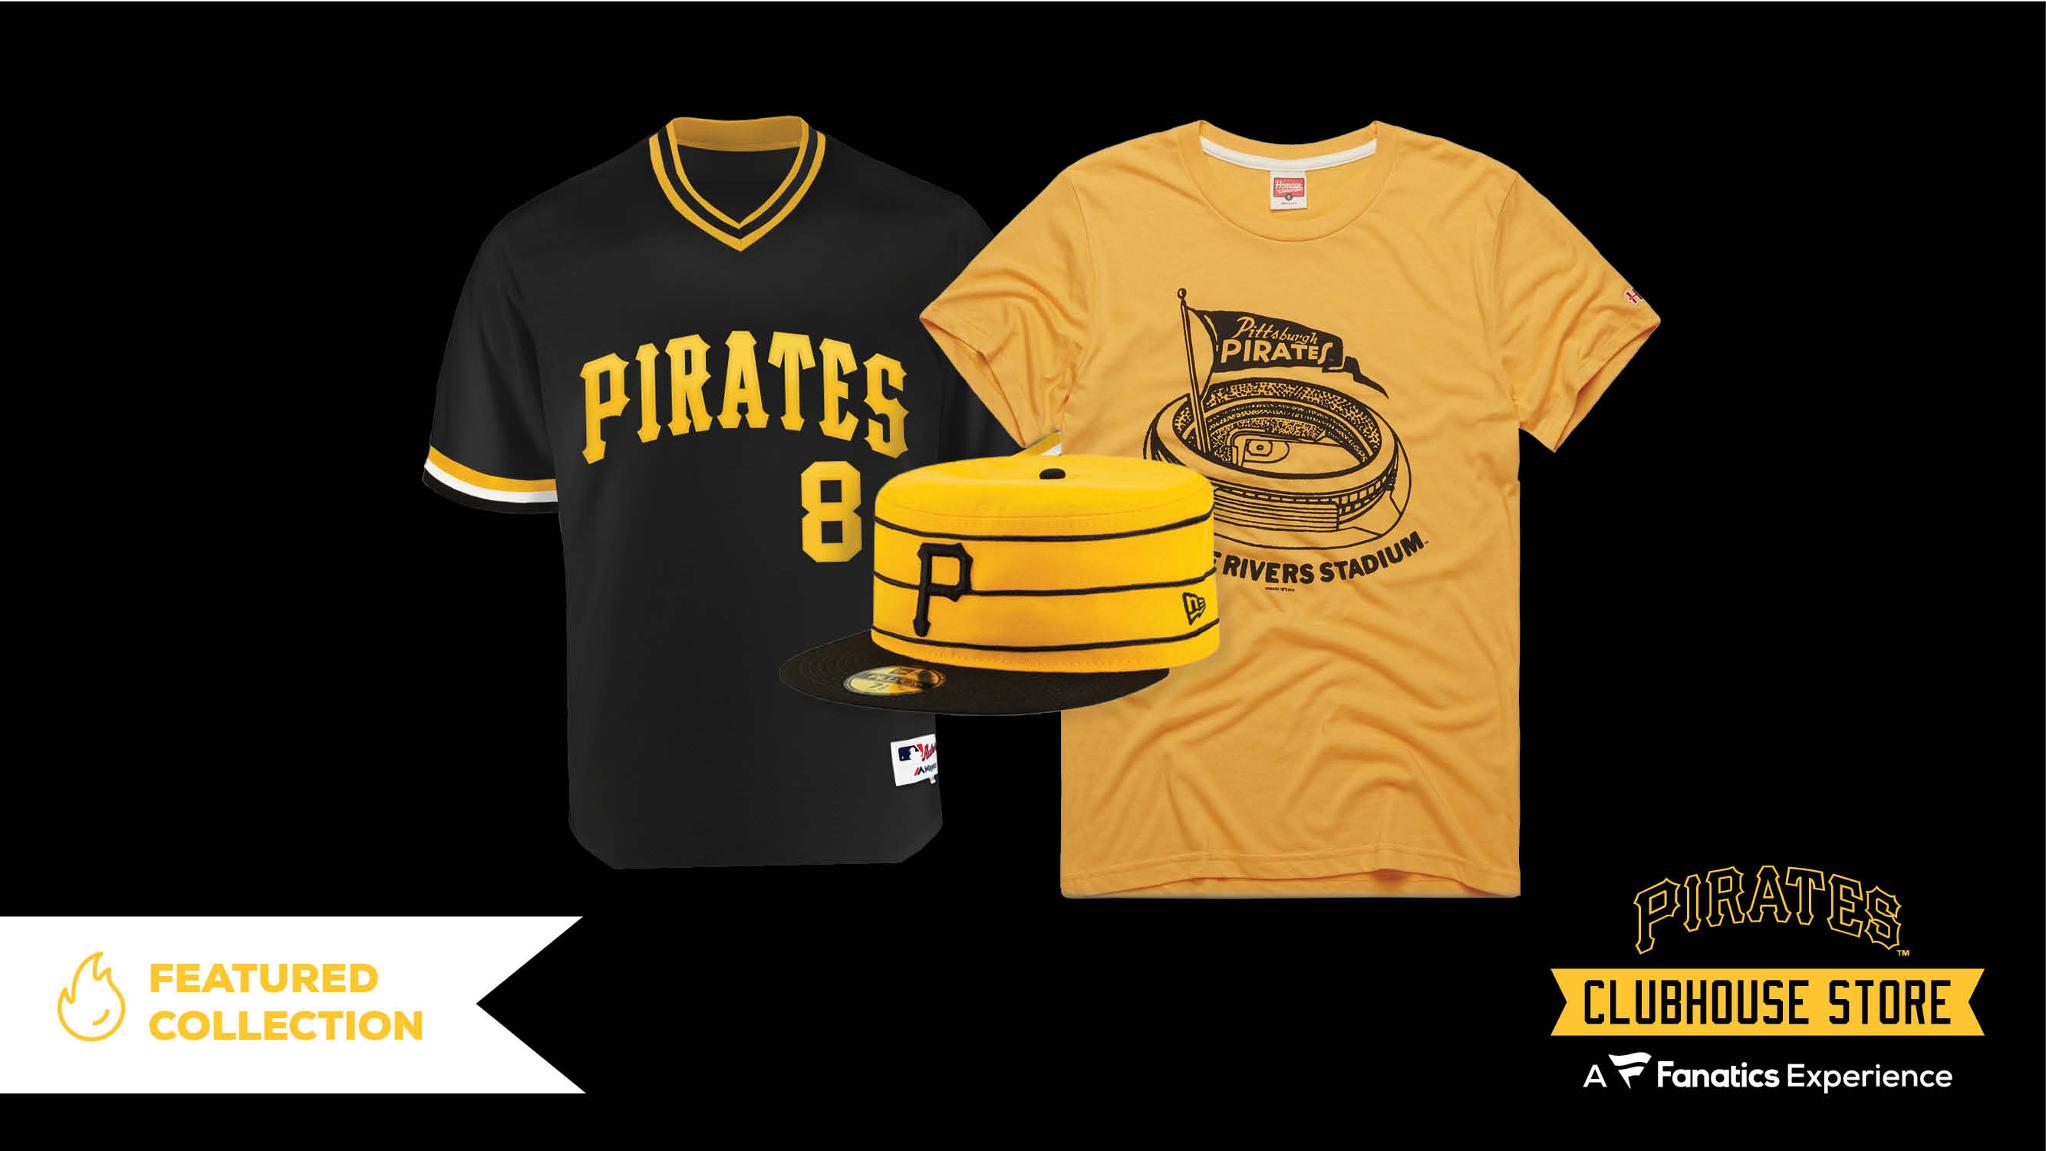 Pittsburgh Pirates on X: This weekend we'll celebrate the 1979 World  Champs! Check out all of the throwback gear as part of our featured  collection in the PNC Park Clubhouse Store. #FamaleeForever